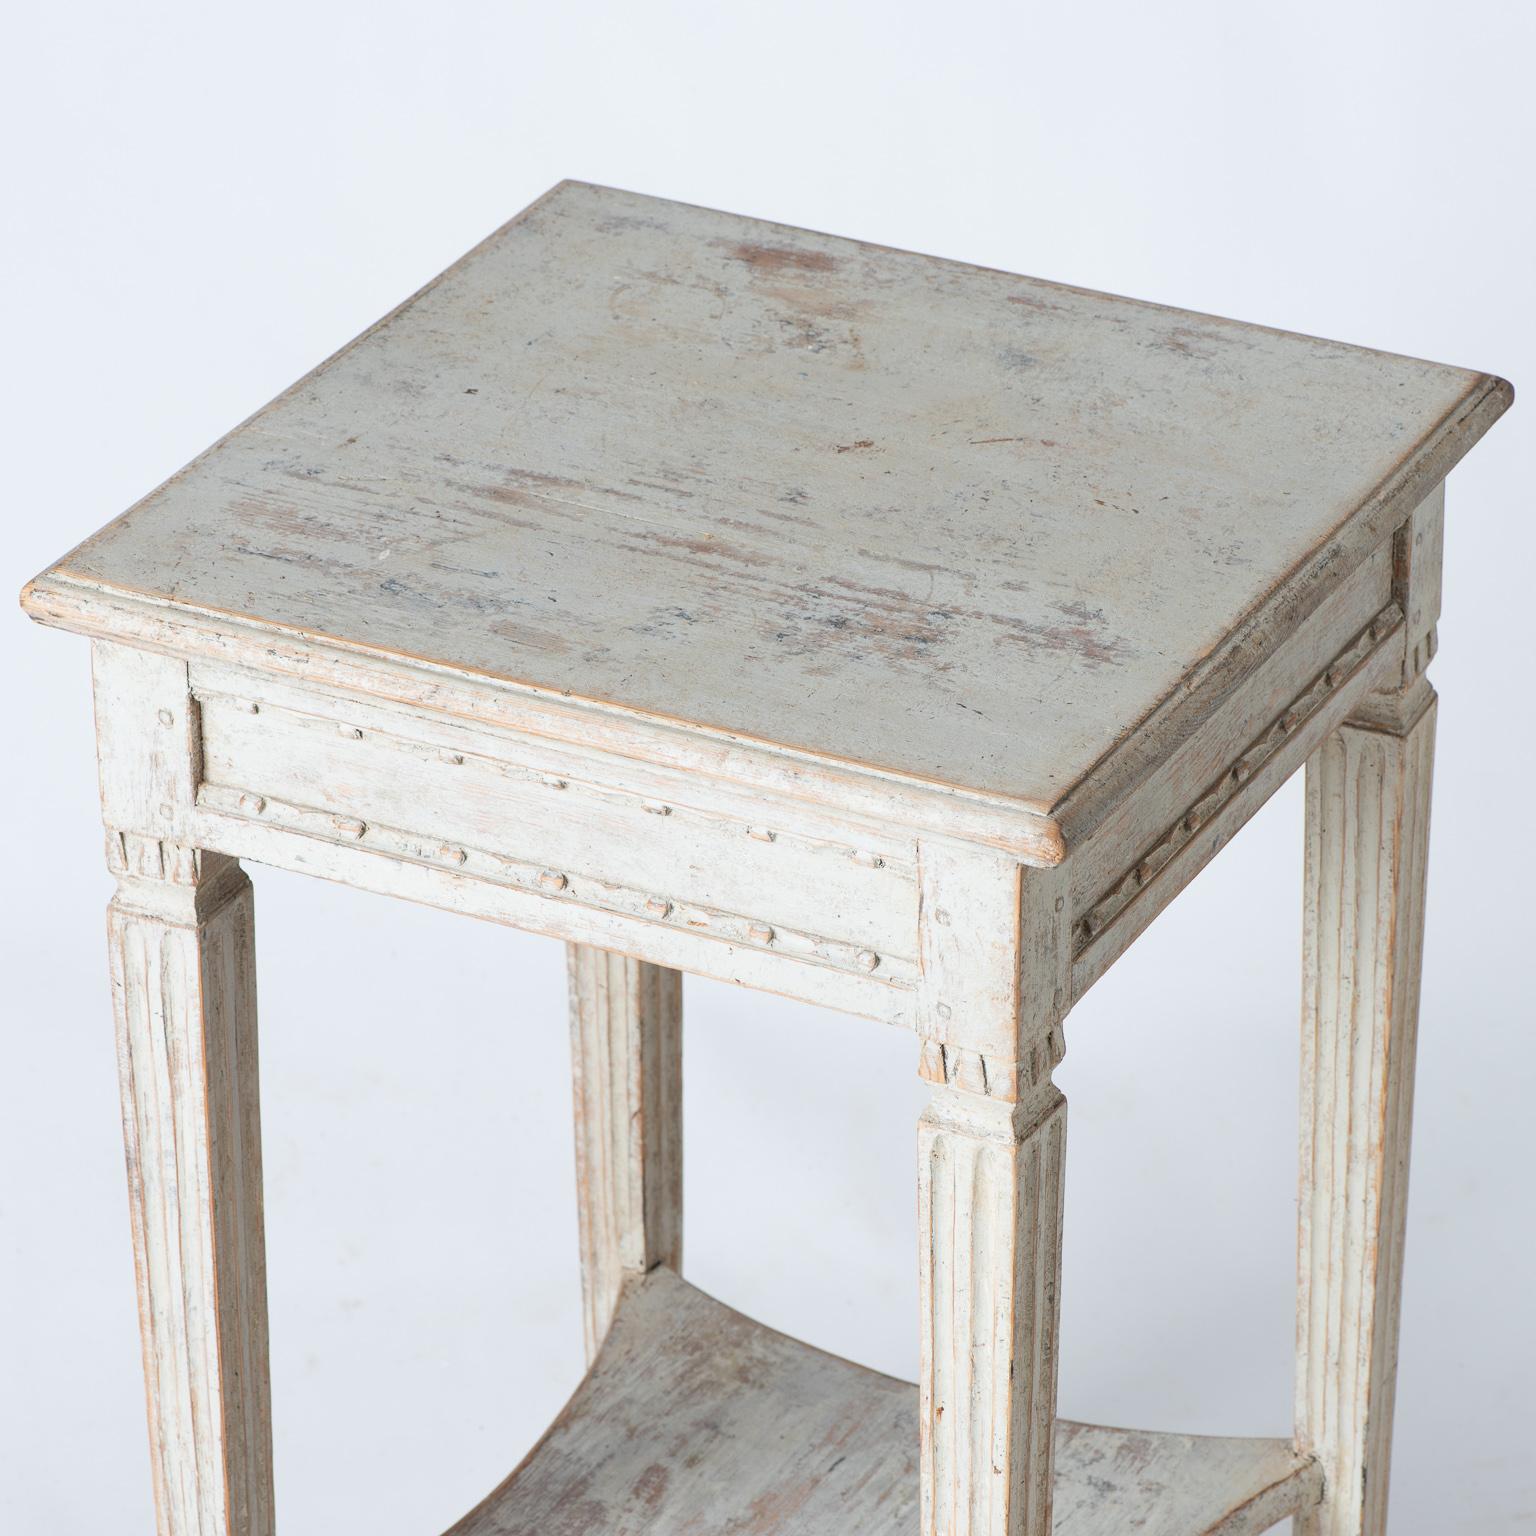 This elegant table from the Gustavian period has refined details, including carvings around the apron, and distinctly reeded legs framing the indented bottom shelf. The pale cream paint surface is original. The table is an ideal size to fit in many